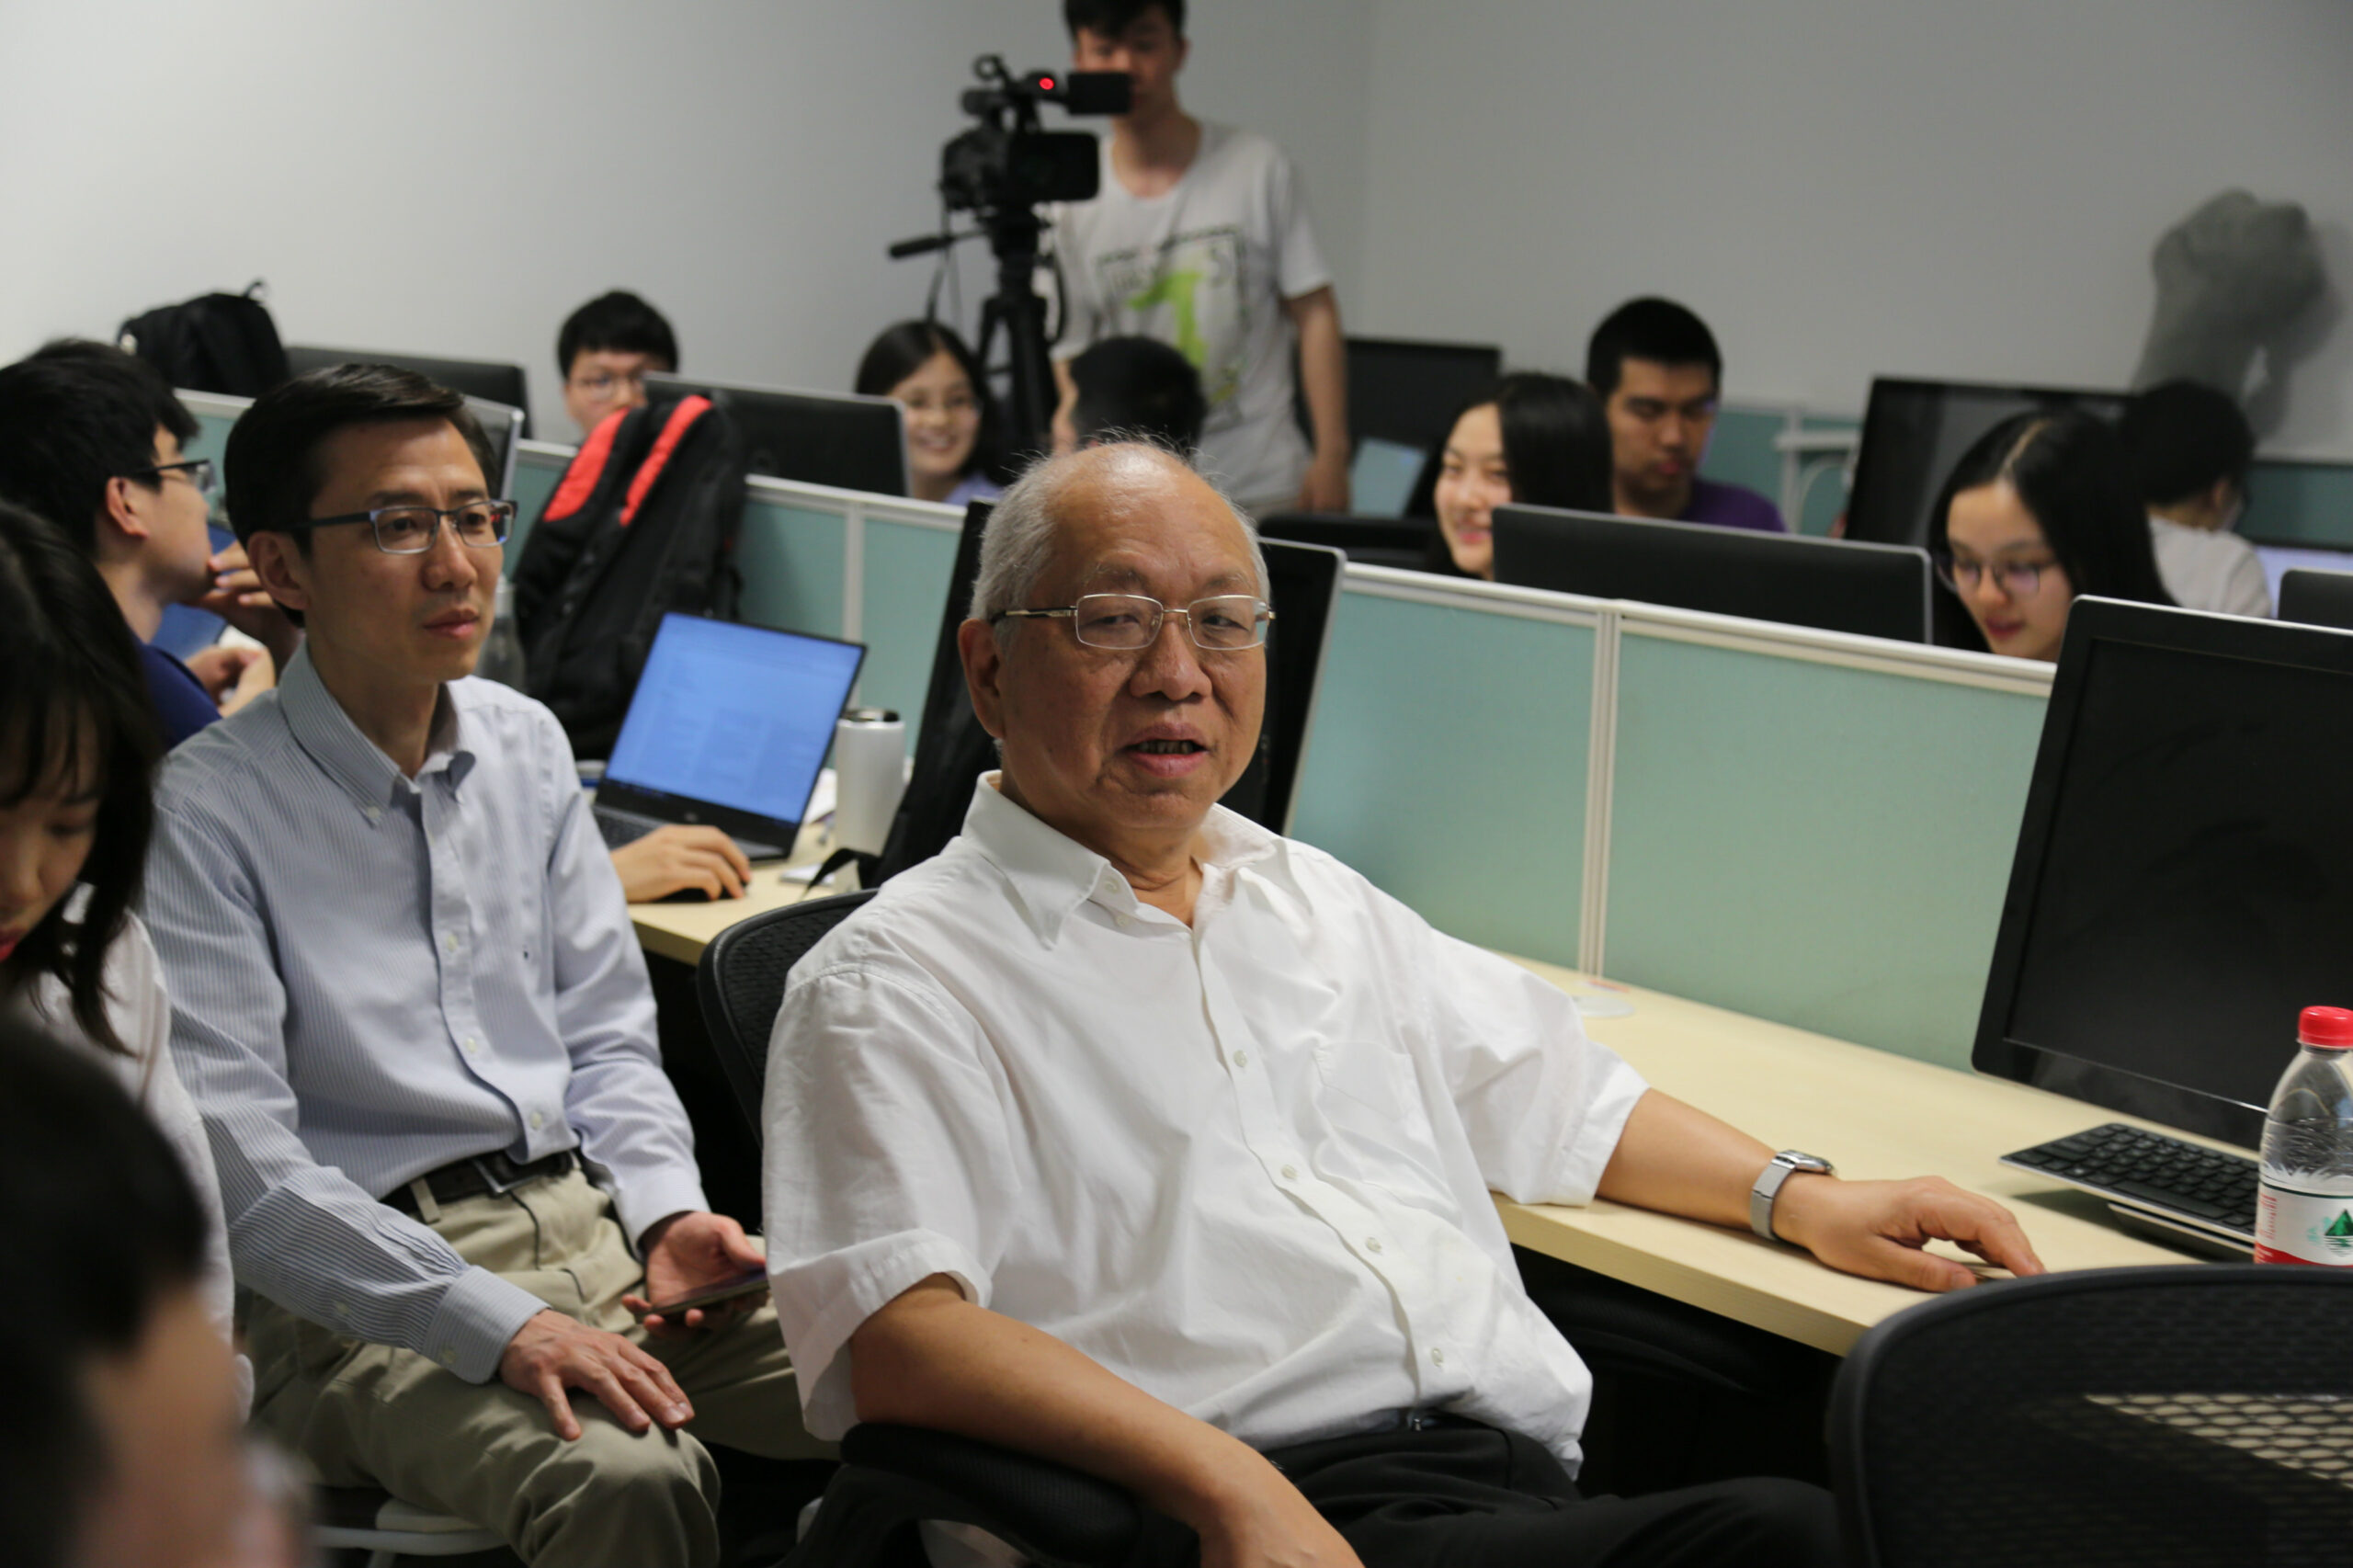 Prof. Shing Toung Yau from Tsinghua University Visits the Center and Gives a Talk